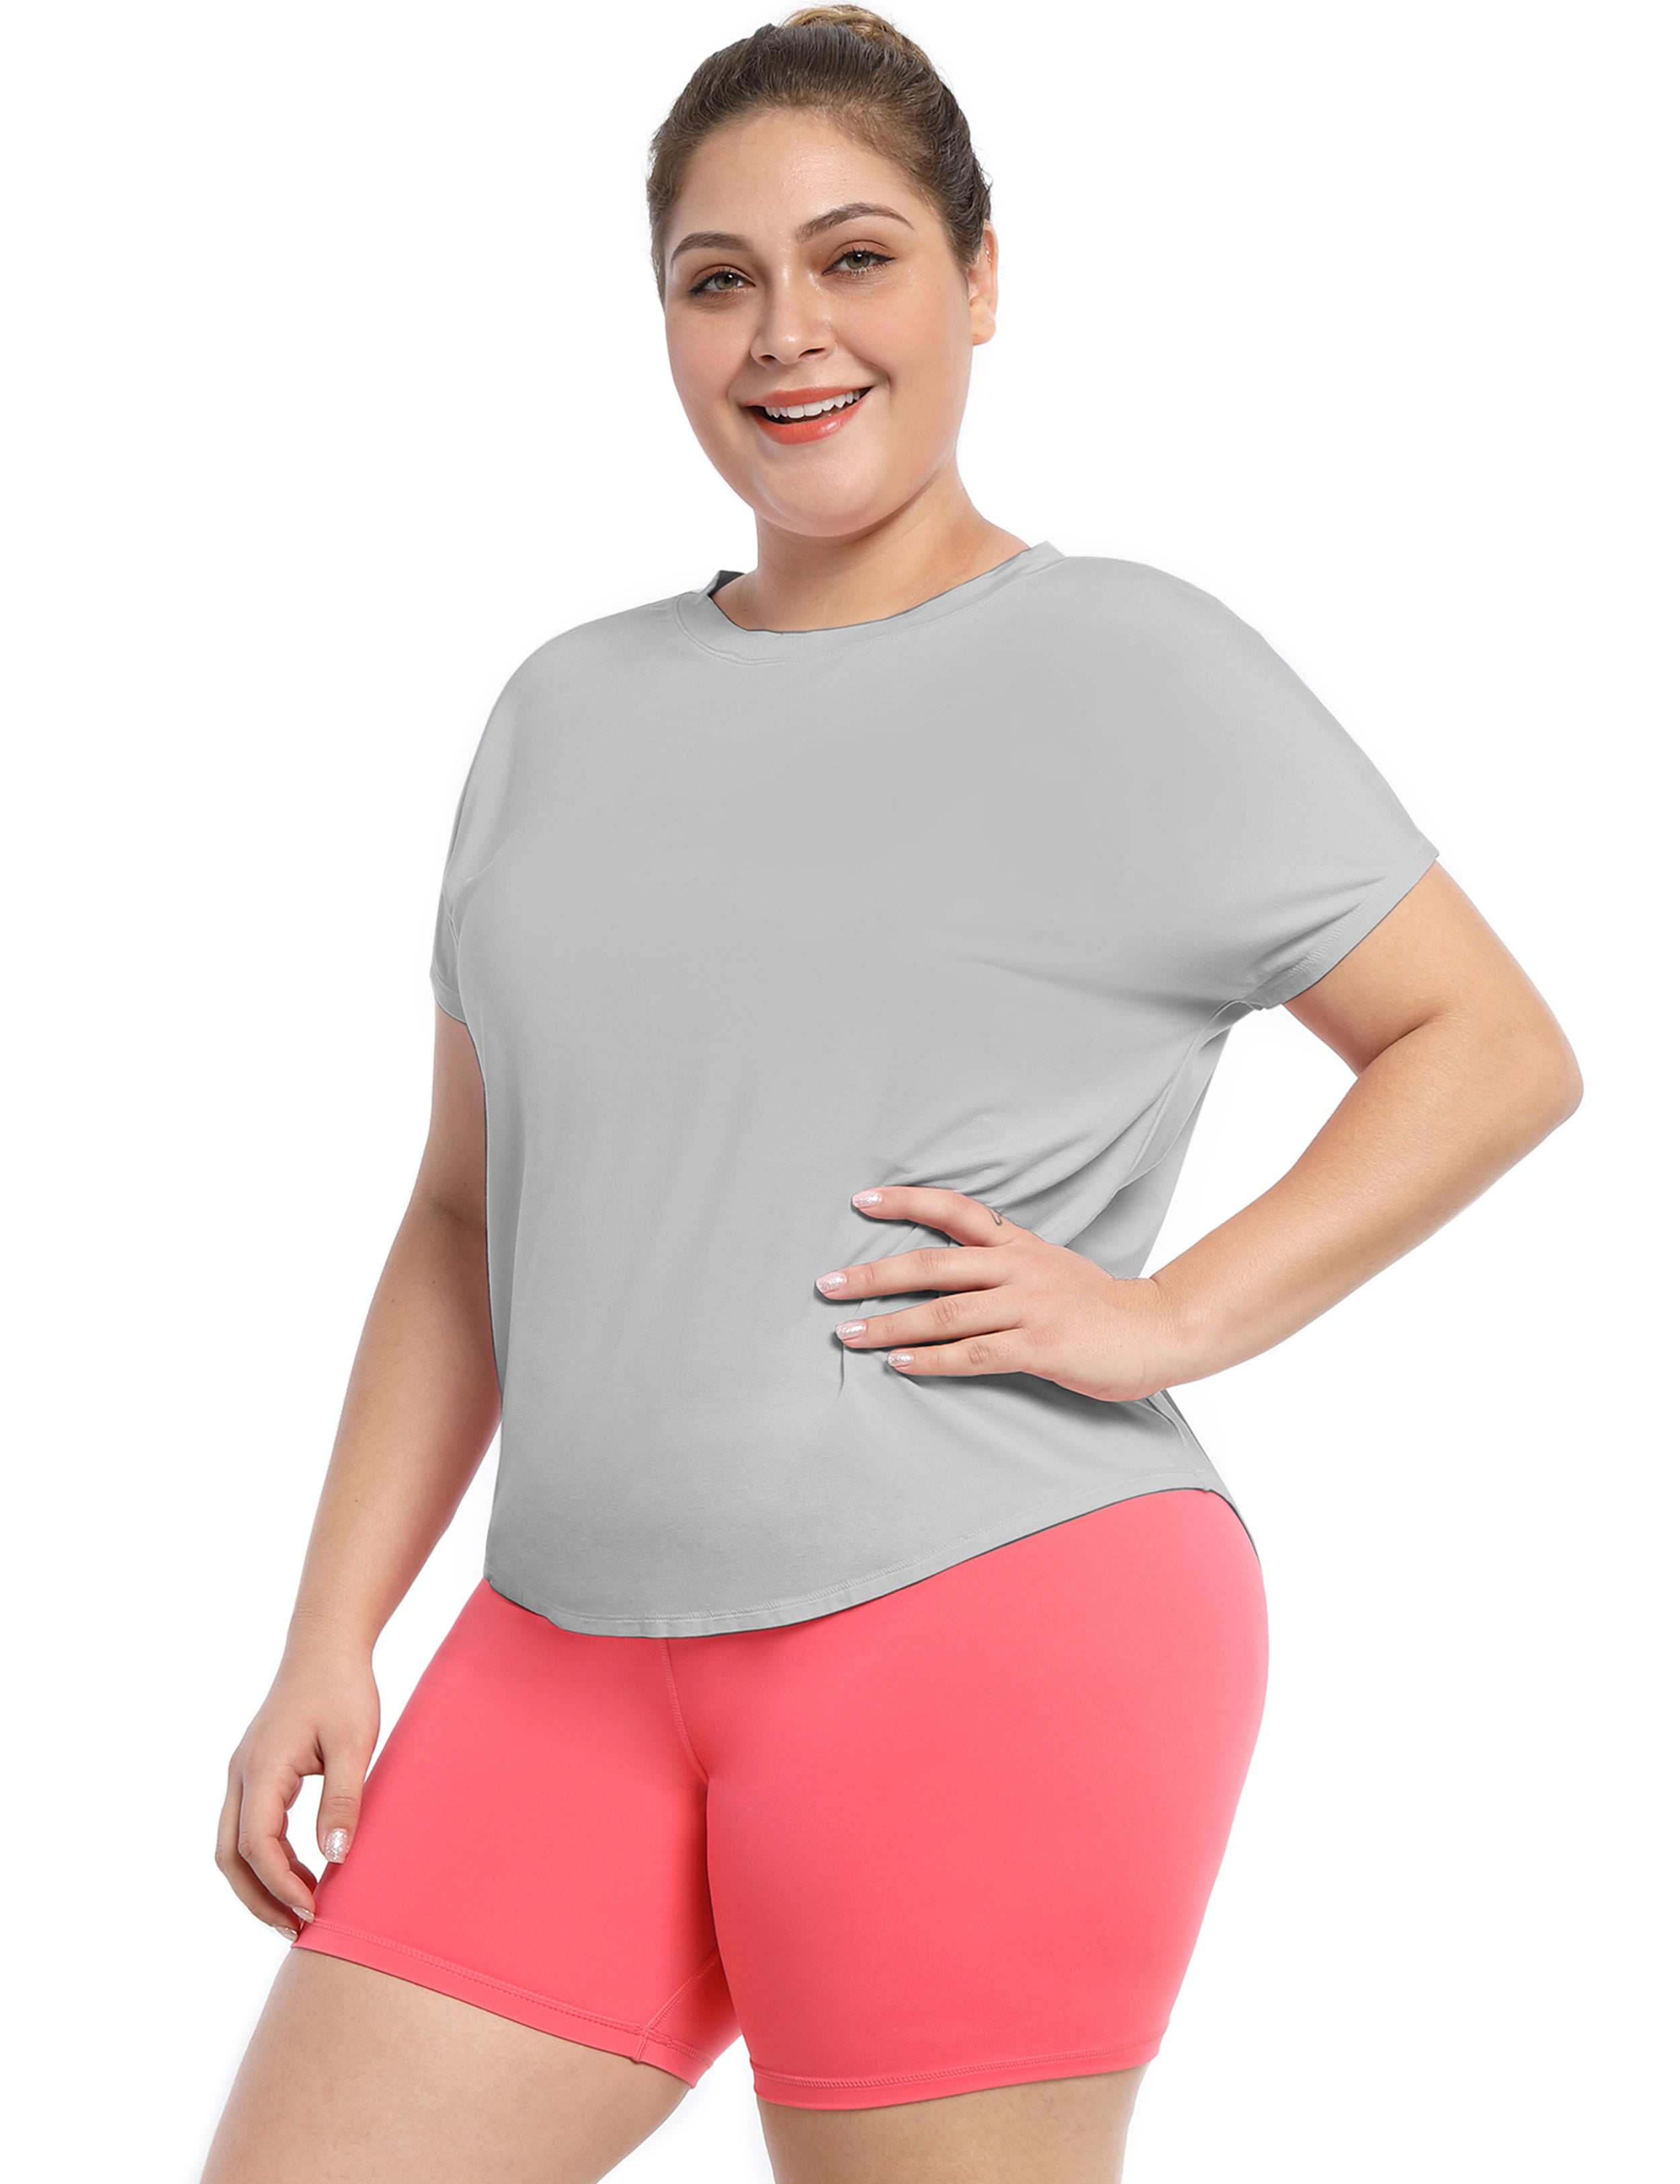 Hip Length Short Sleeve Shirt lightgray 93%Modal/7%Spandex Designed for Pilates Classic Fit, Hip Length An easy fit that floats away from your body Sits below the waistband for moderate, everyday coverage Lightweight, elastic, strong fabric for moisture absorption and perspiration, sports and fitness clothing.